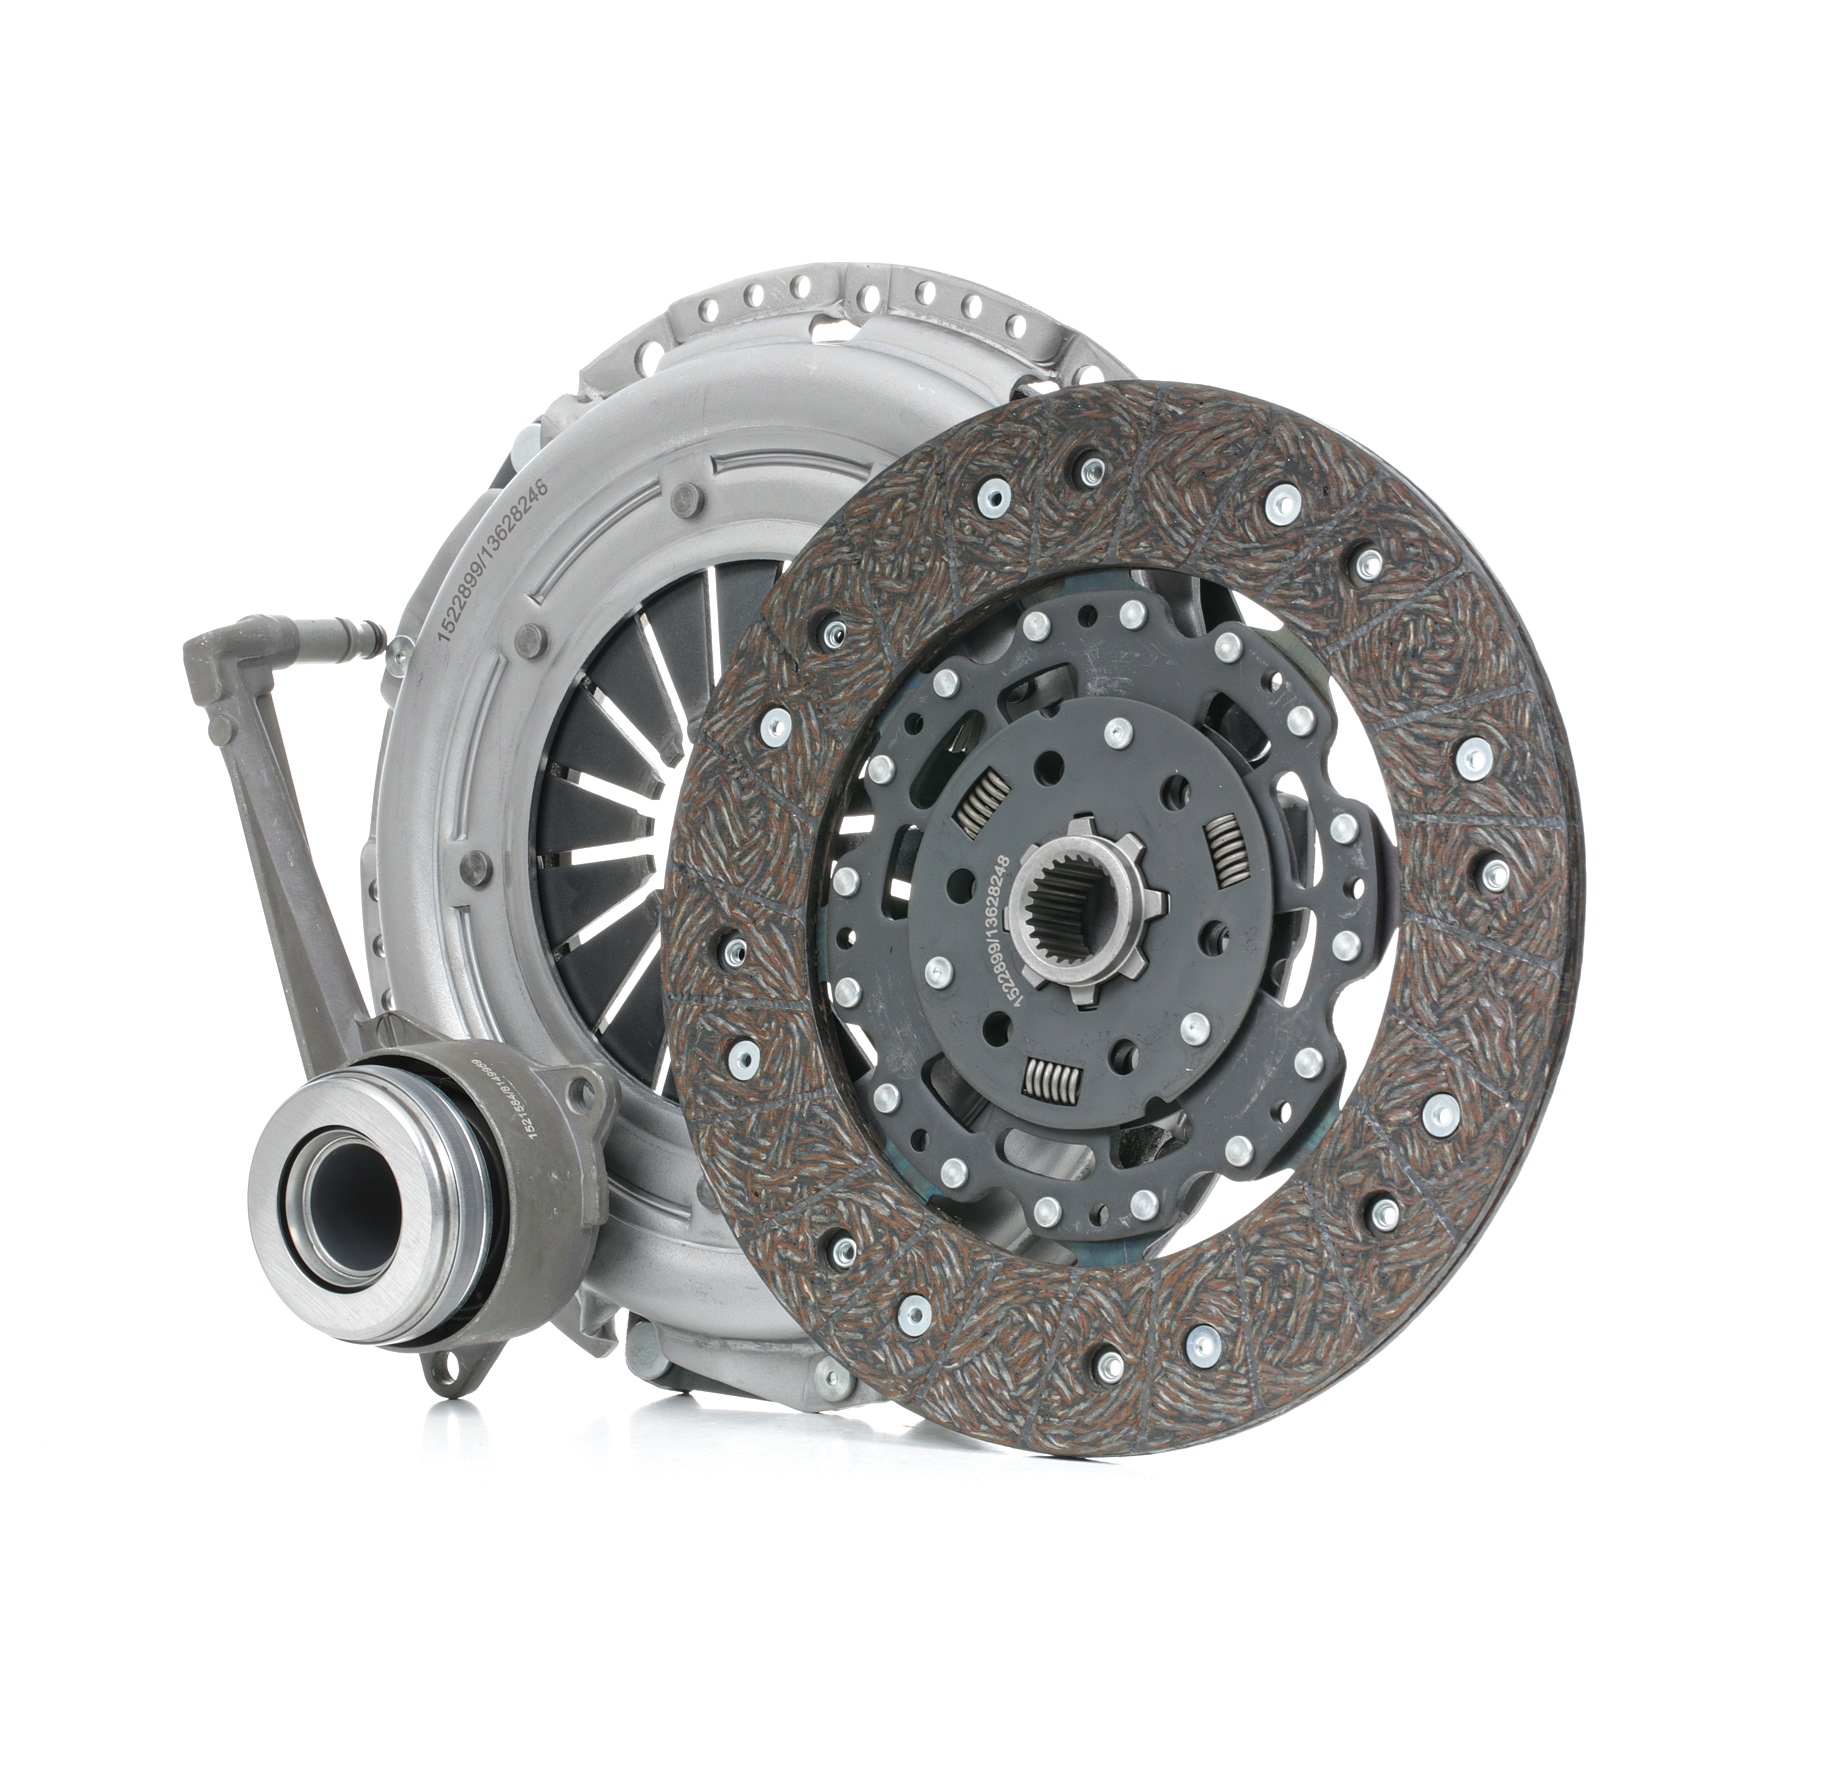 RIDEX 479C0730 Clutch kit with central slave cylinder, 240mm